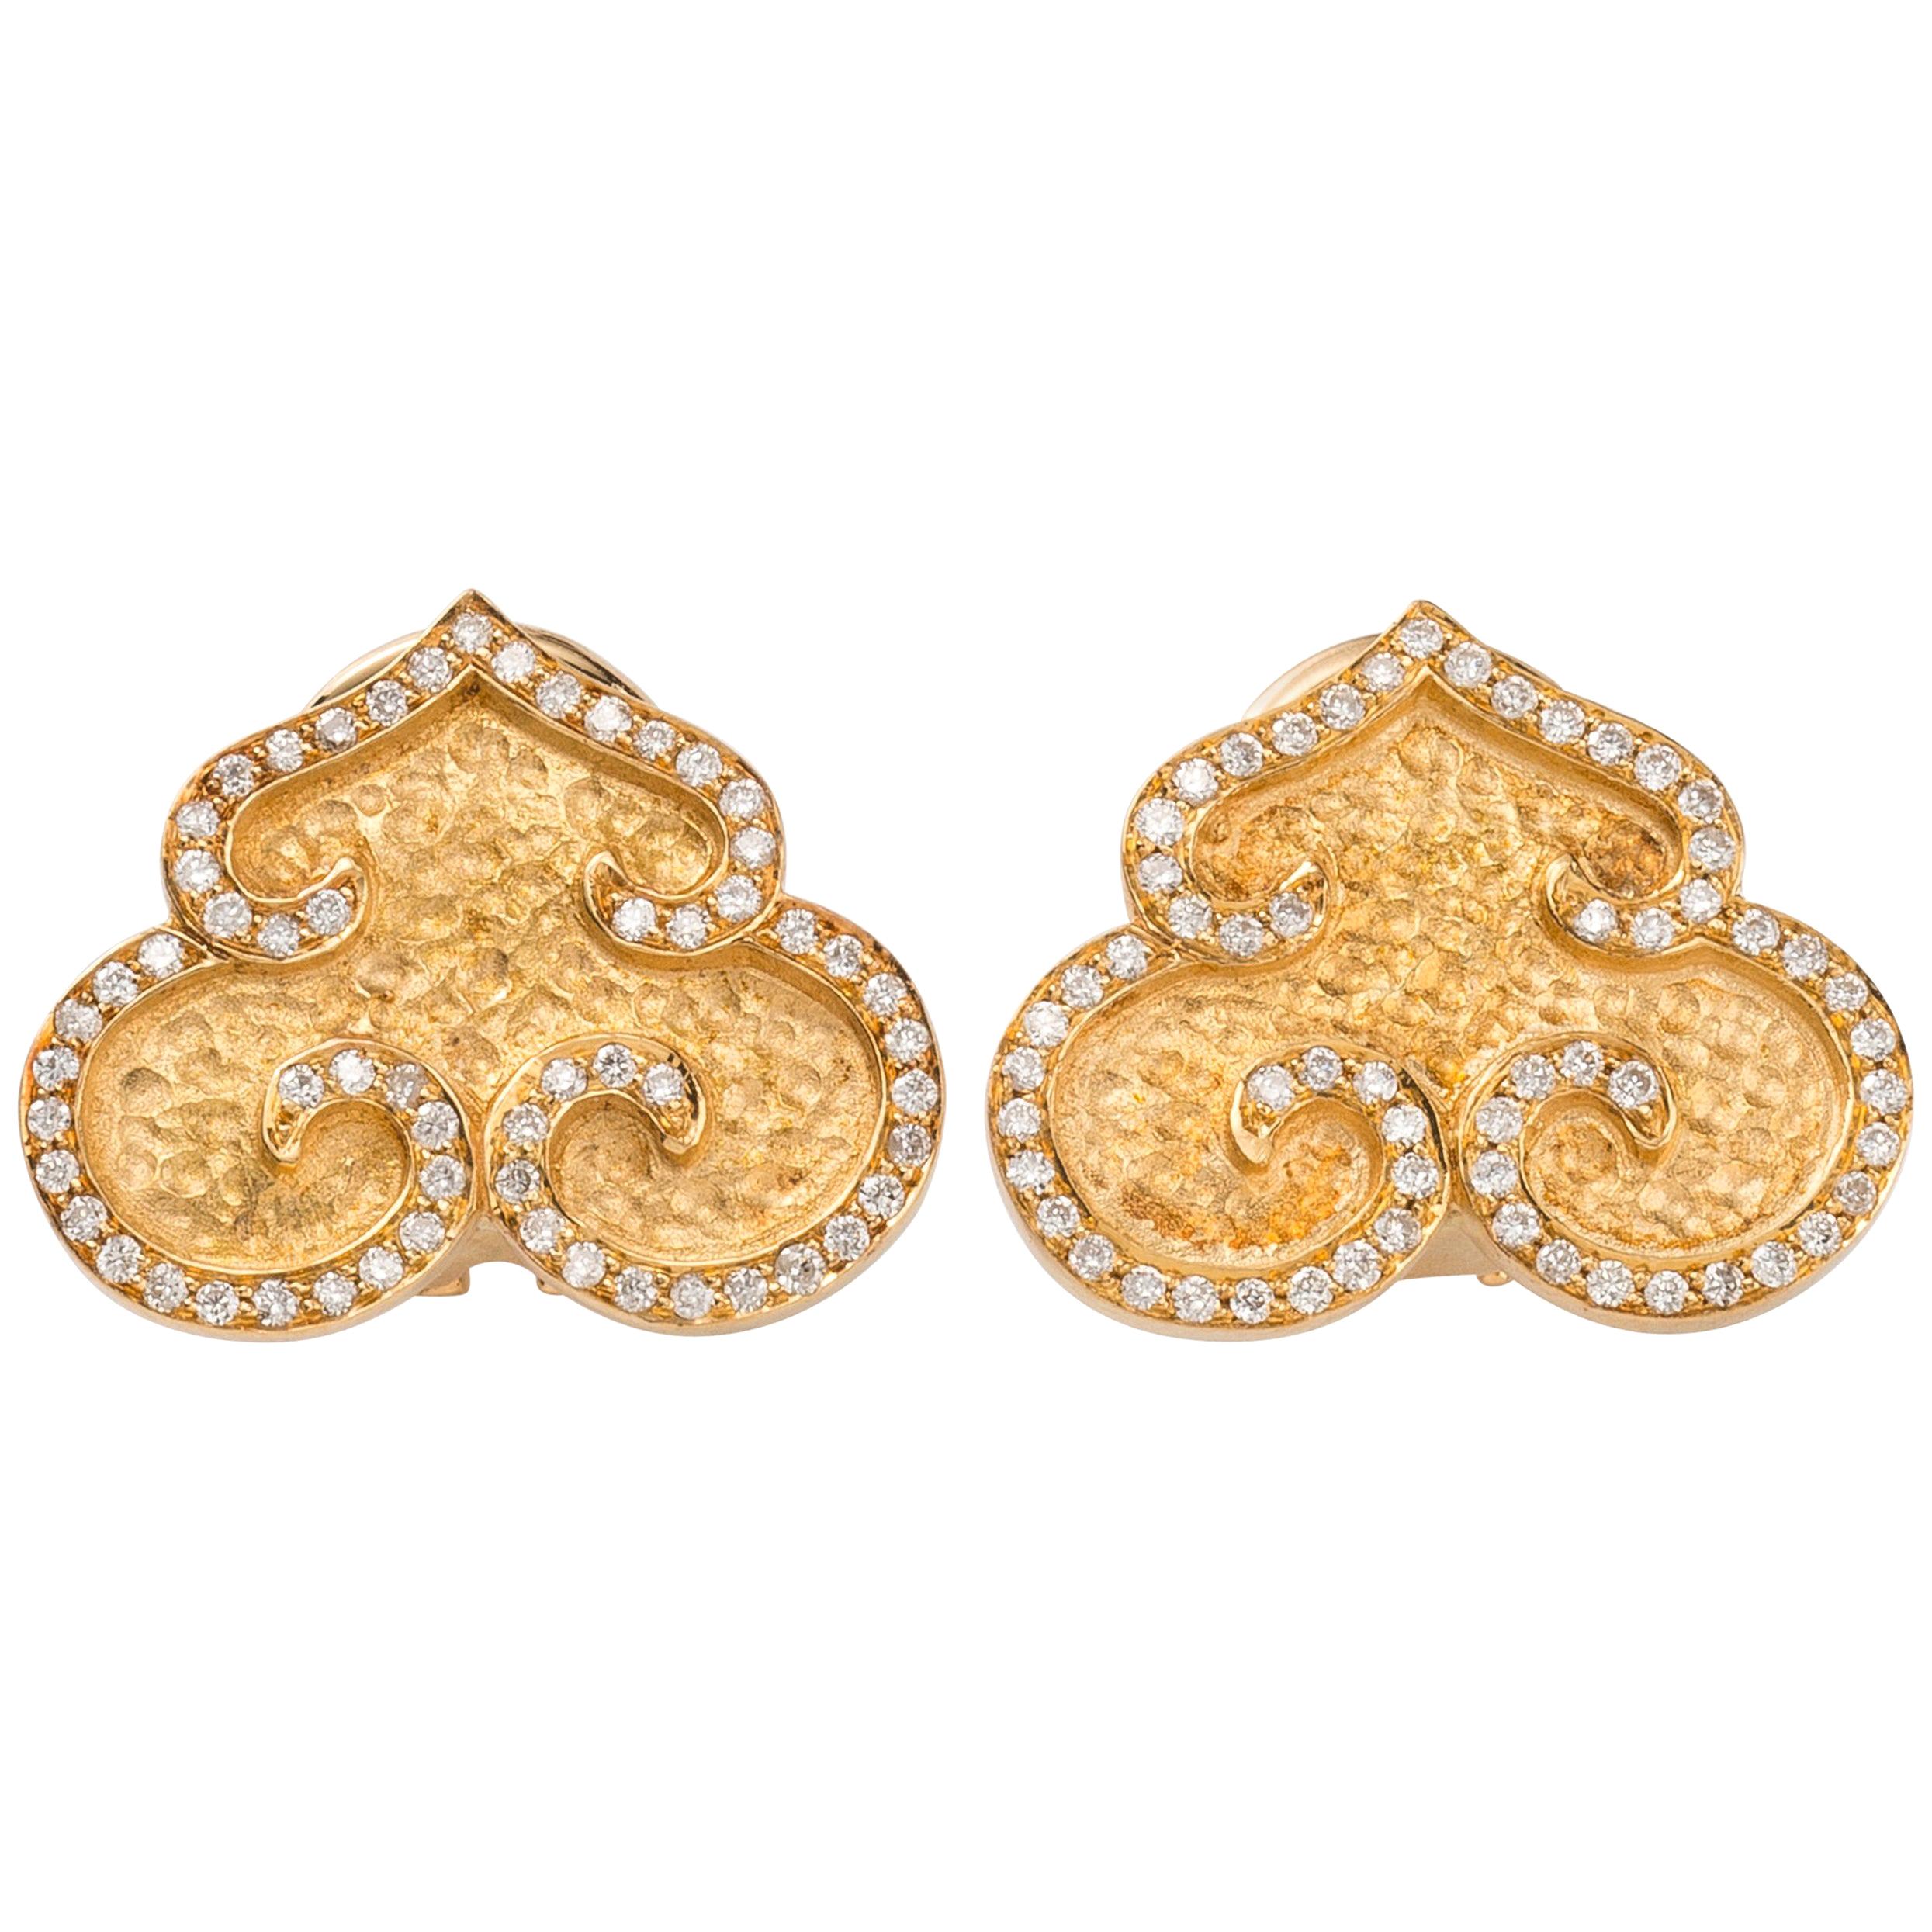 Chinoiserie Gold Earrings with Diamonds